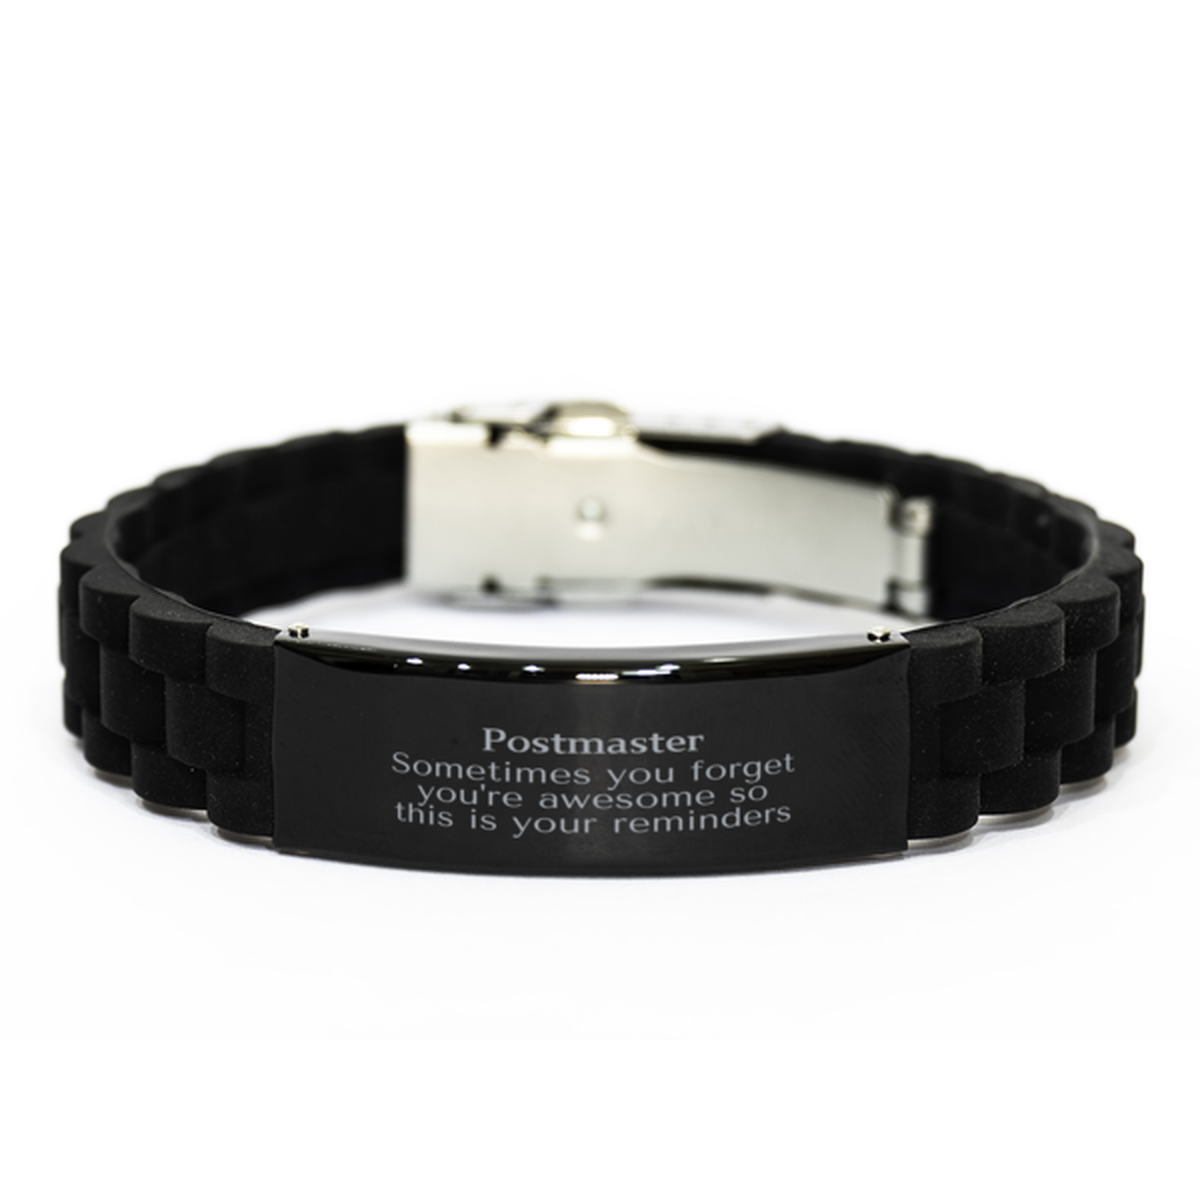 Sentimental Postmaster Black Glidelock Clasp Bracelet, Postmaster Sometimes you forget you're awesome so this is your reminders, Graduation Christmas Birthday Gifts for Postmaster, Men, Women, Coworkers